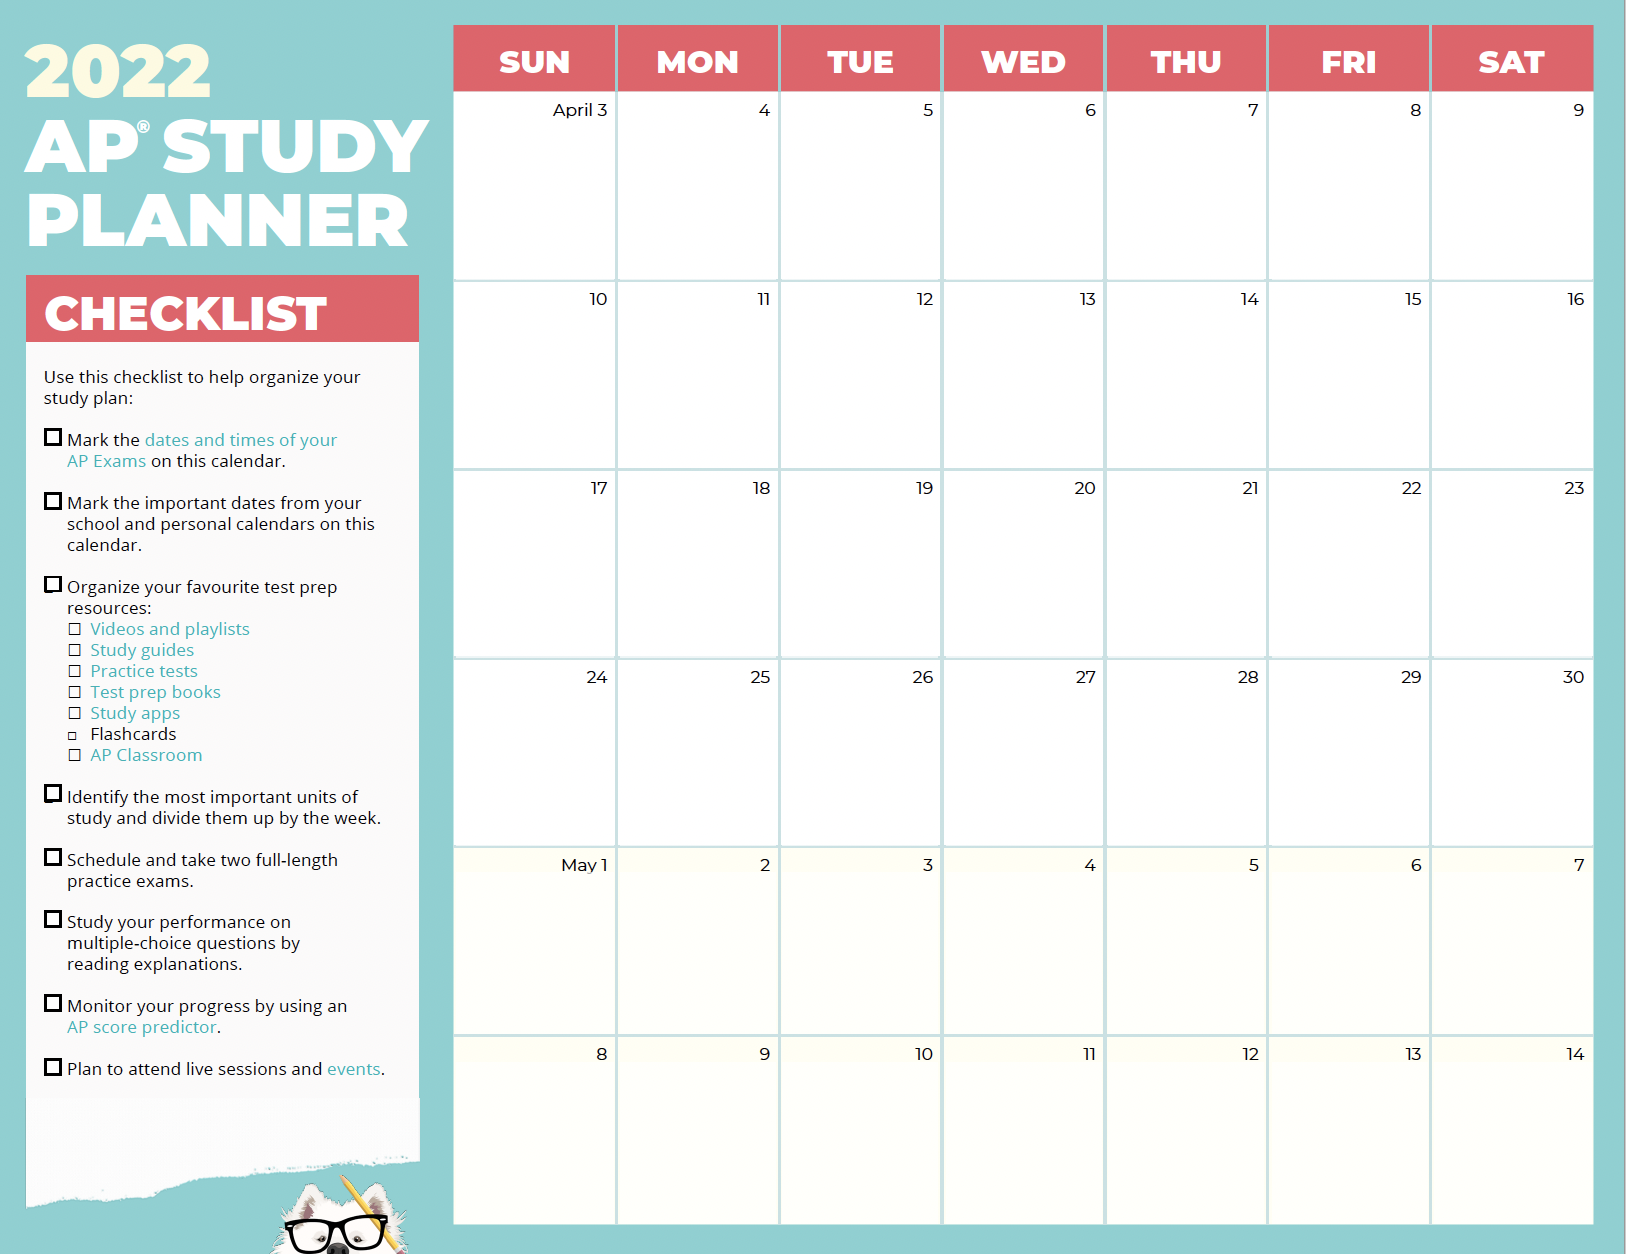 monthly calendar to help map out study plan for ap exams